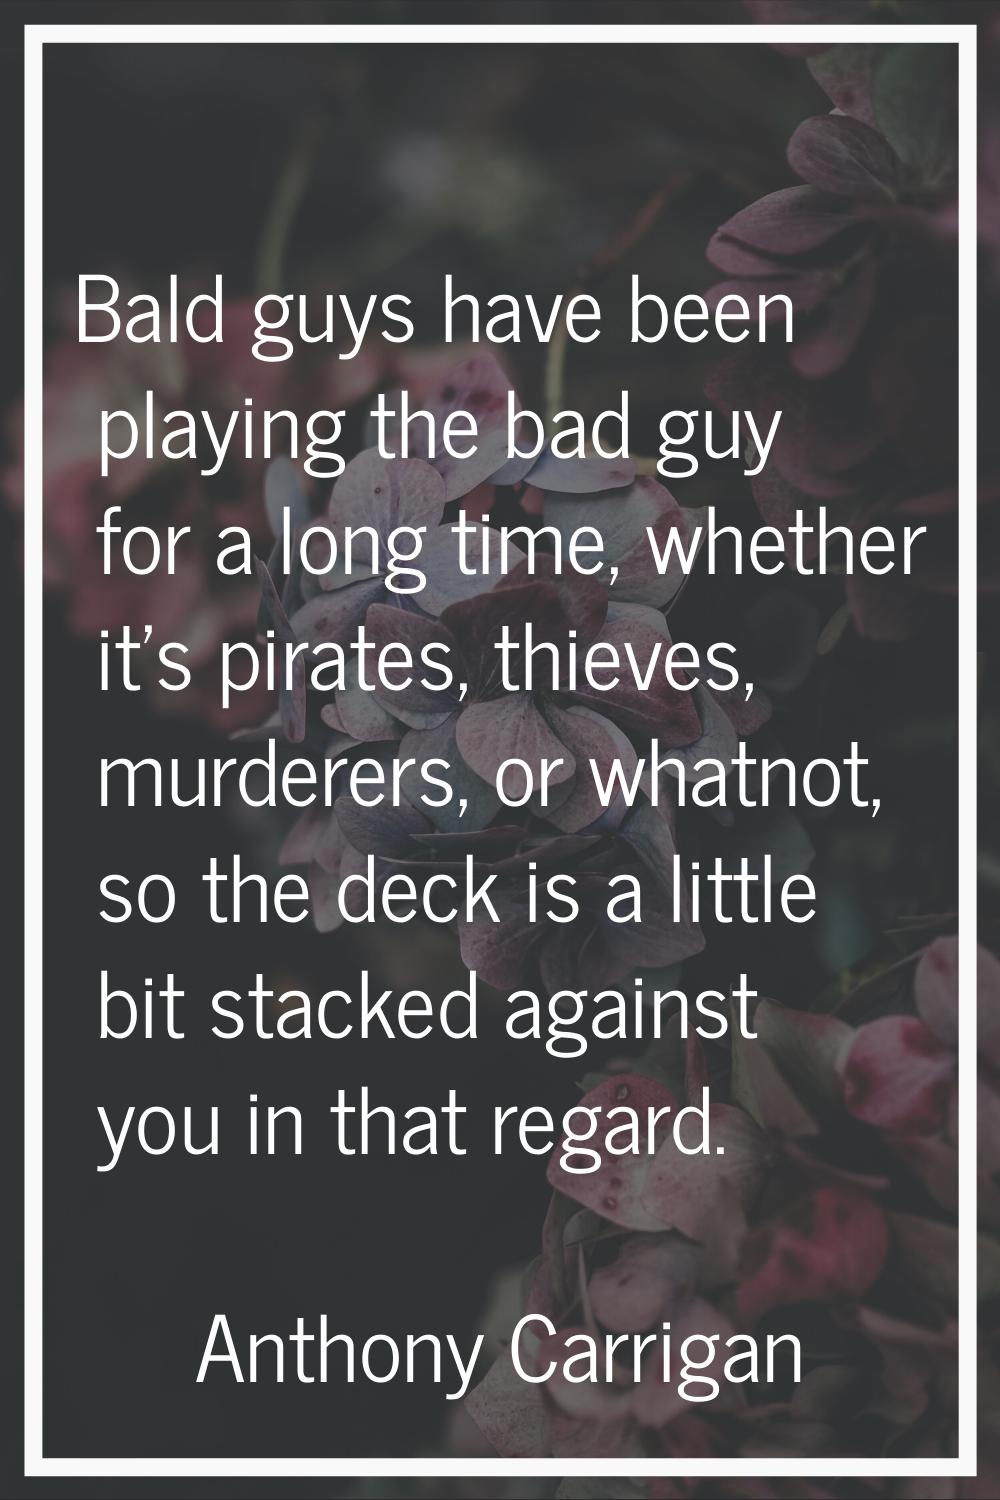 Bald guys have been playing the bad guy for a long time, whether it's pirates, thieves, murderers, 